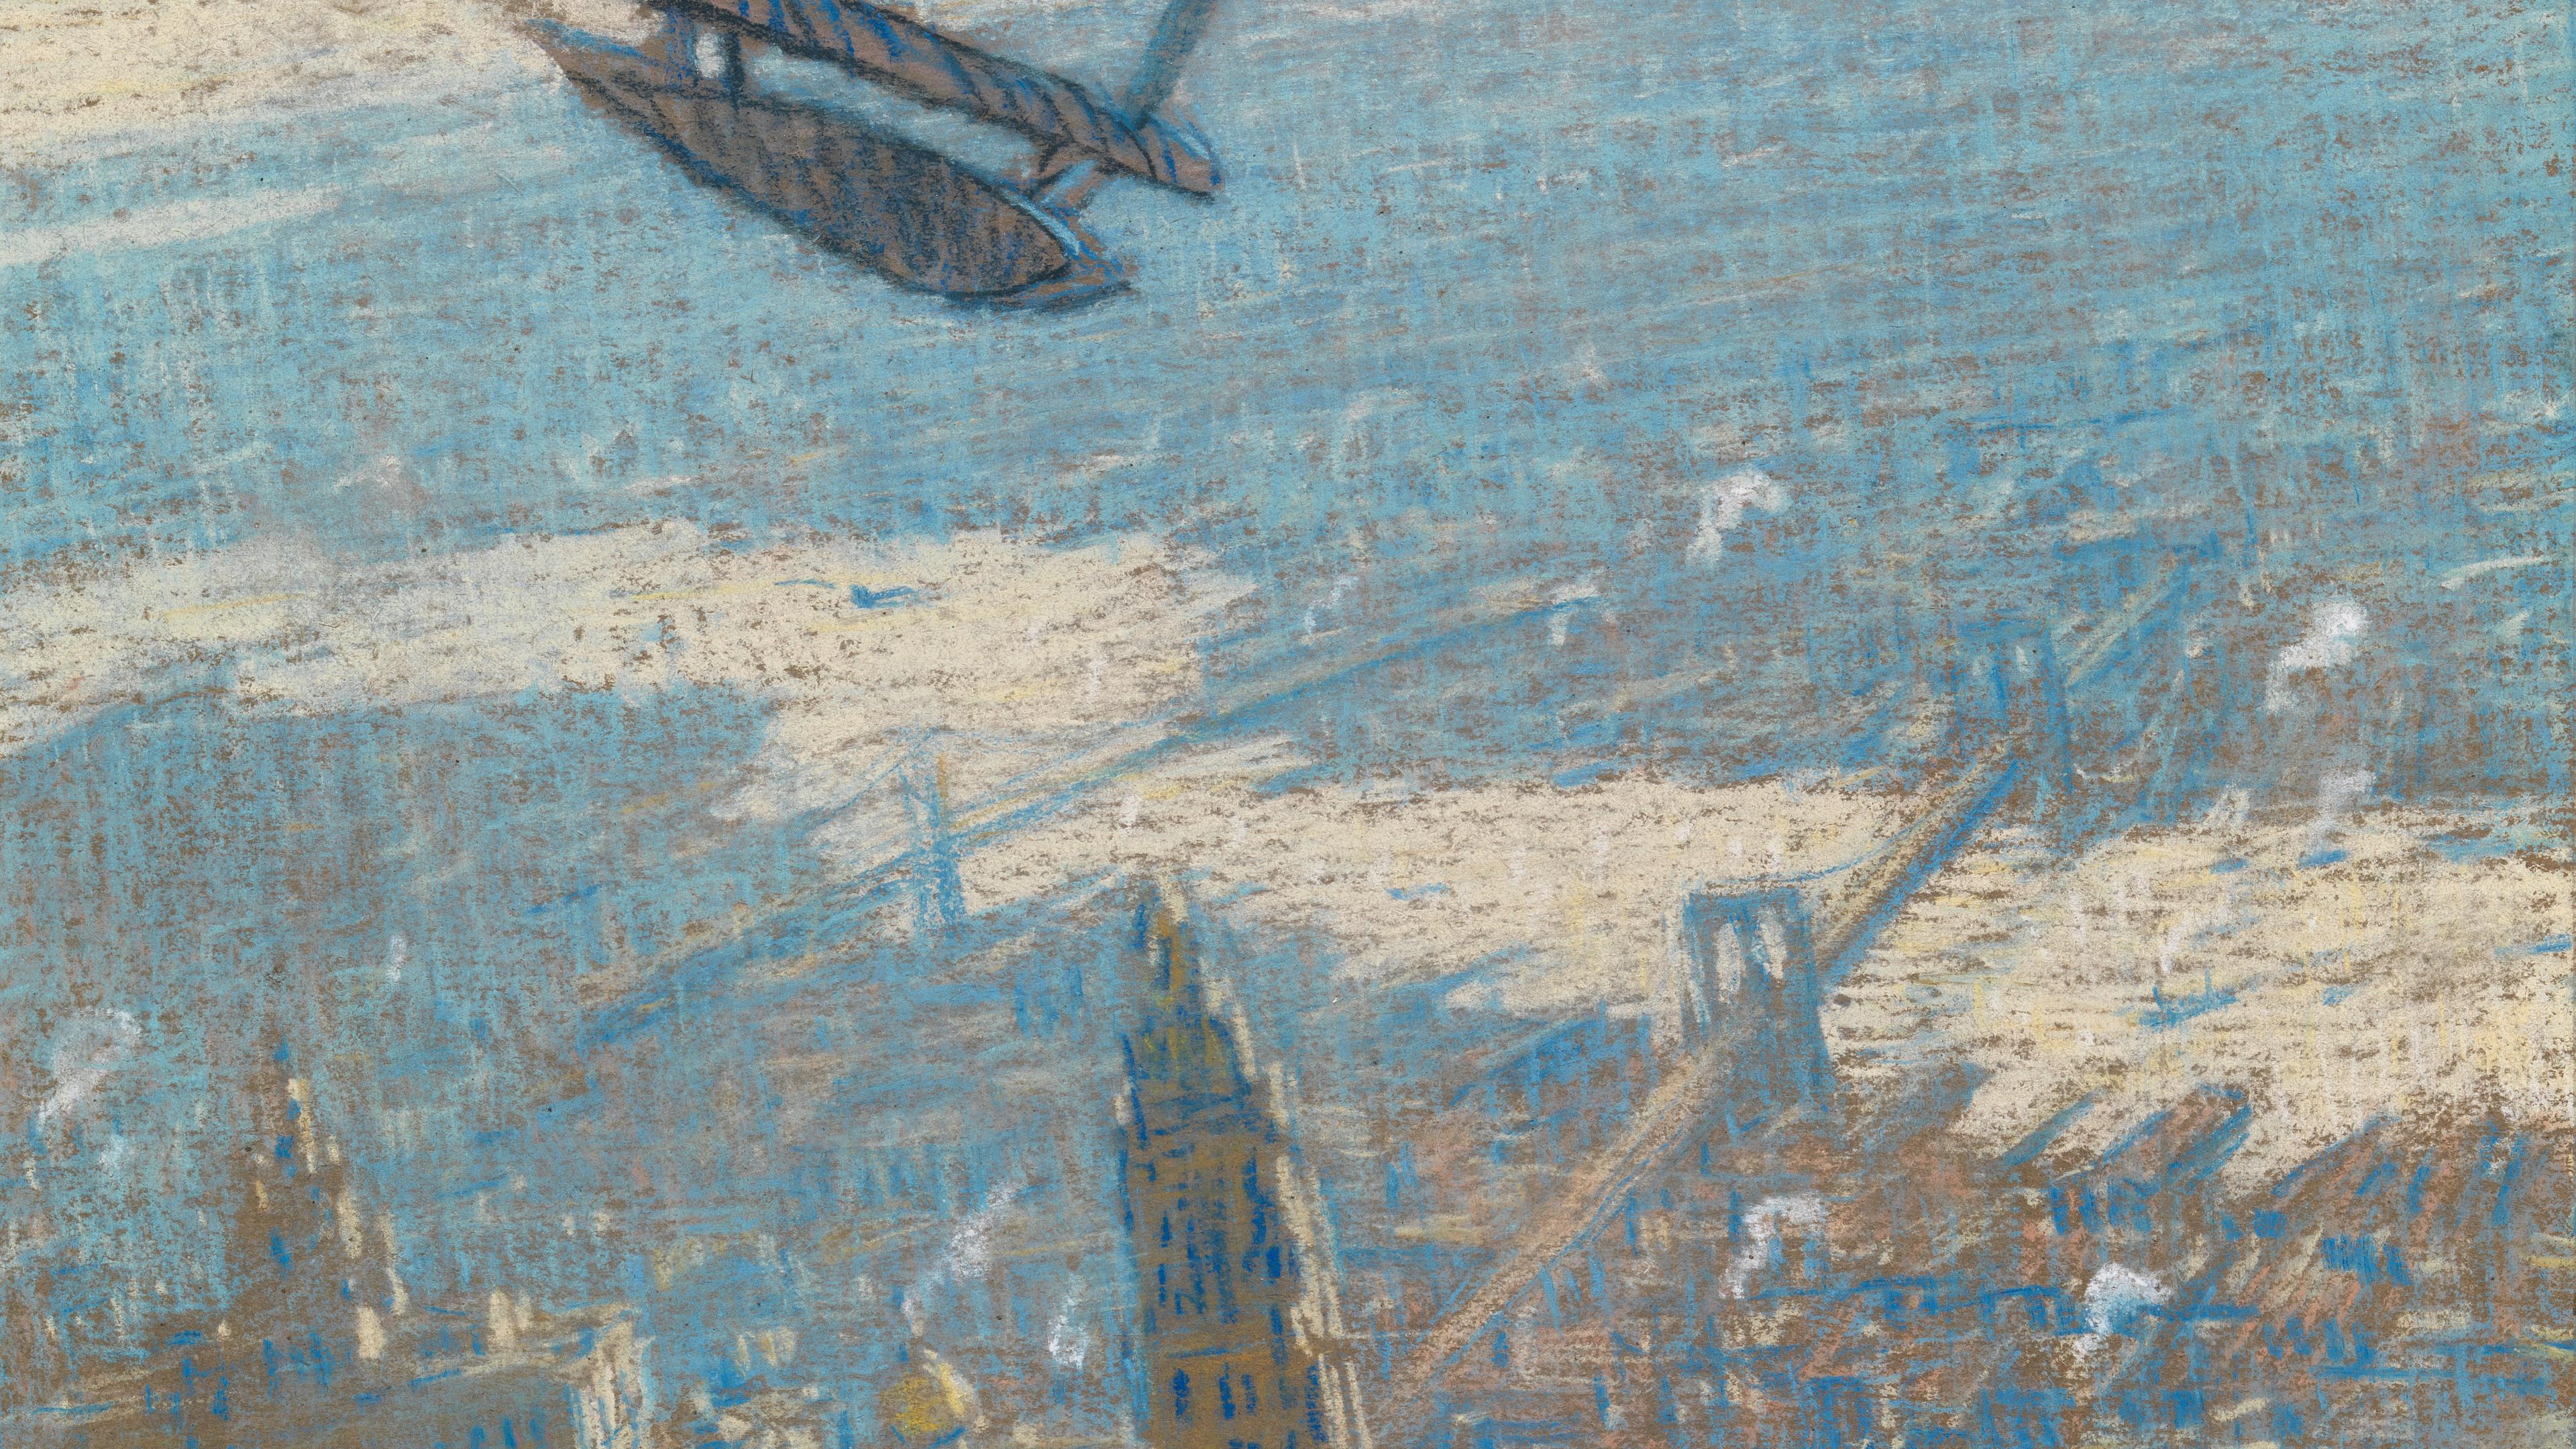 Painting depicting a sun-dappled aerial view of lower Manhattan with blue hues